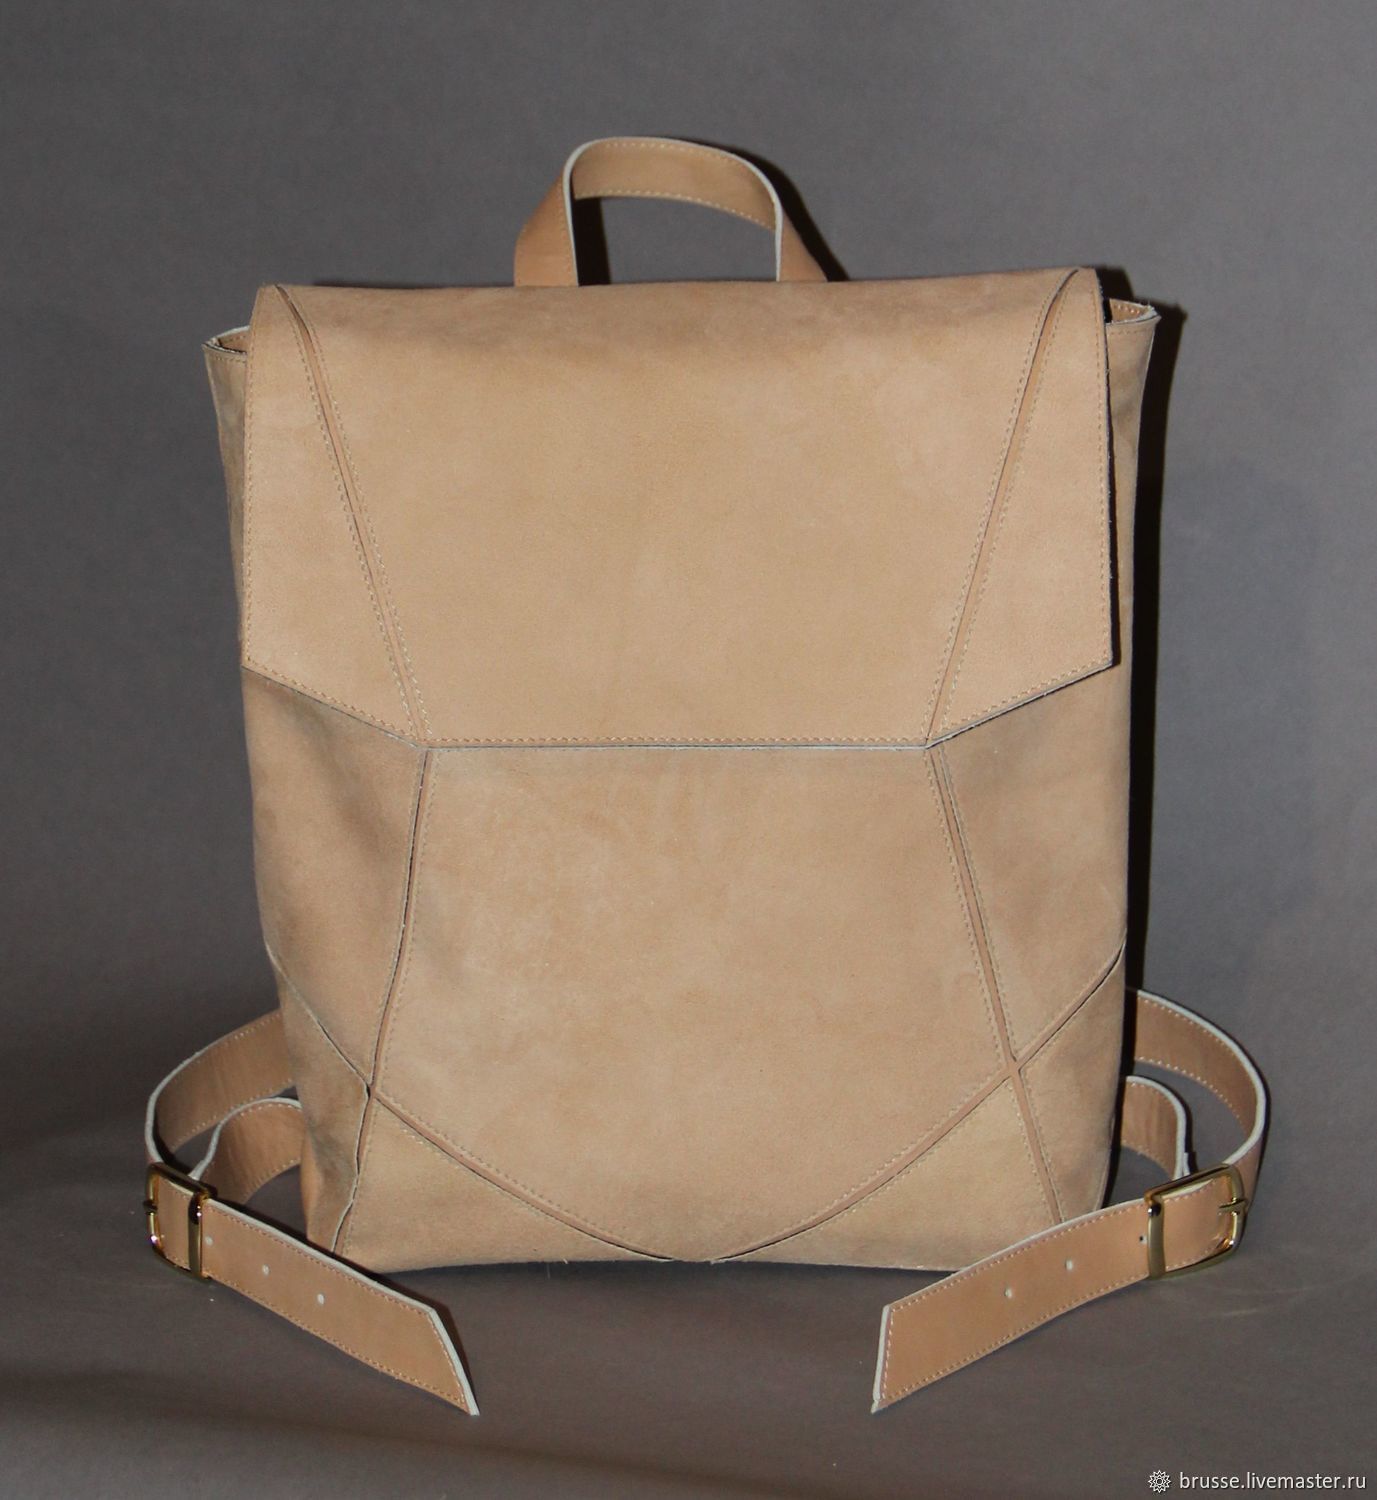 Backpack made of genuine leather and suede, Backpacks, St. Petersburg,  Фото №1